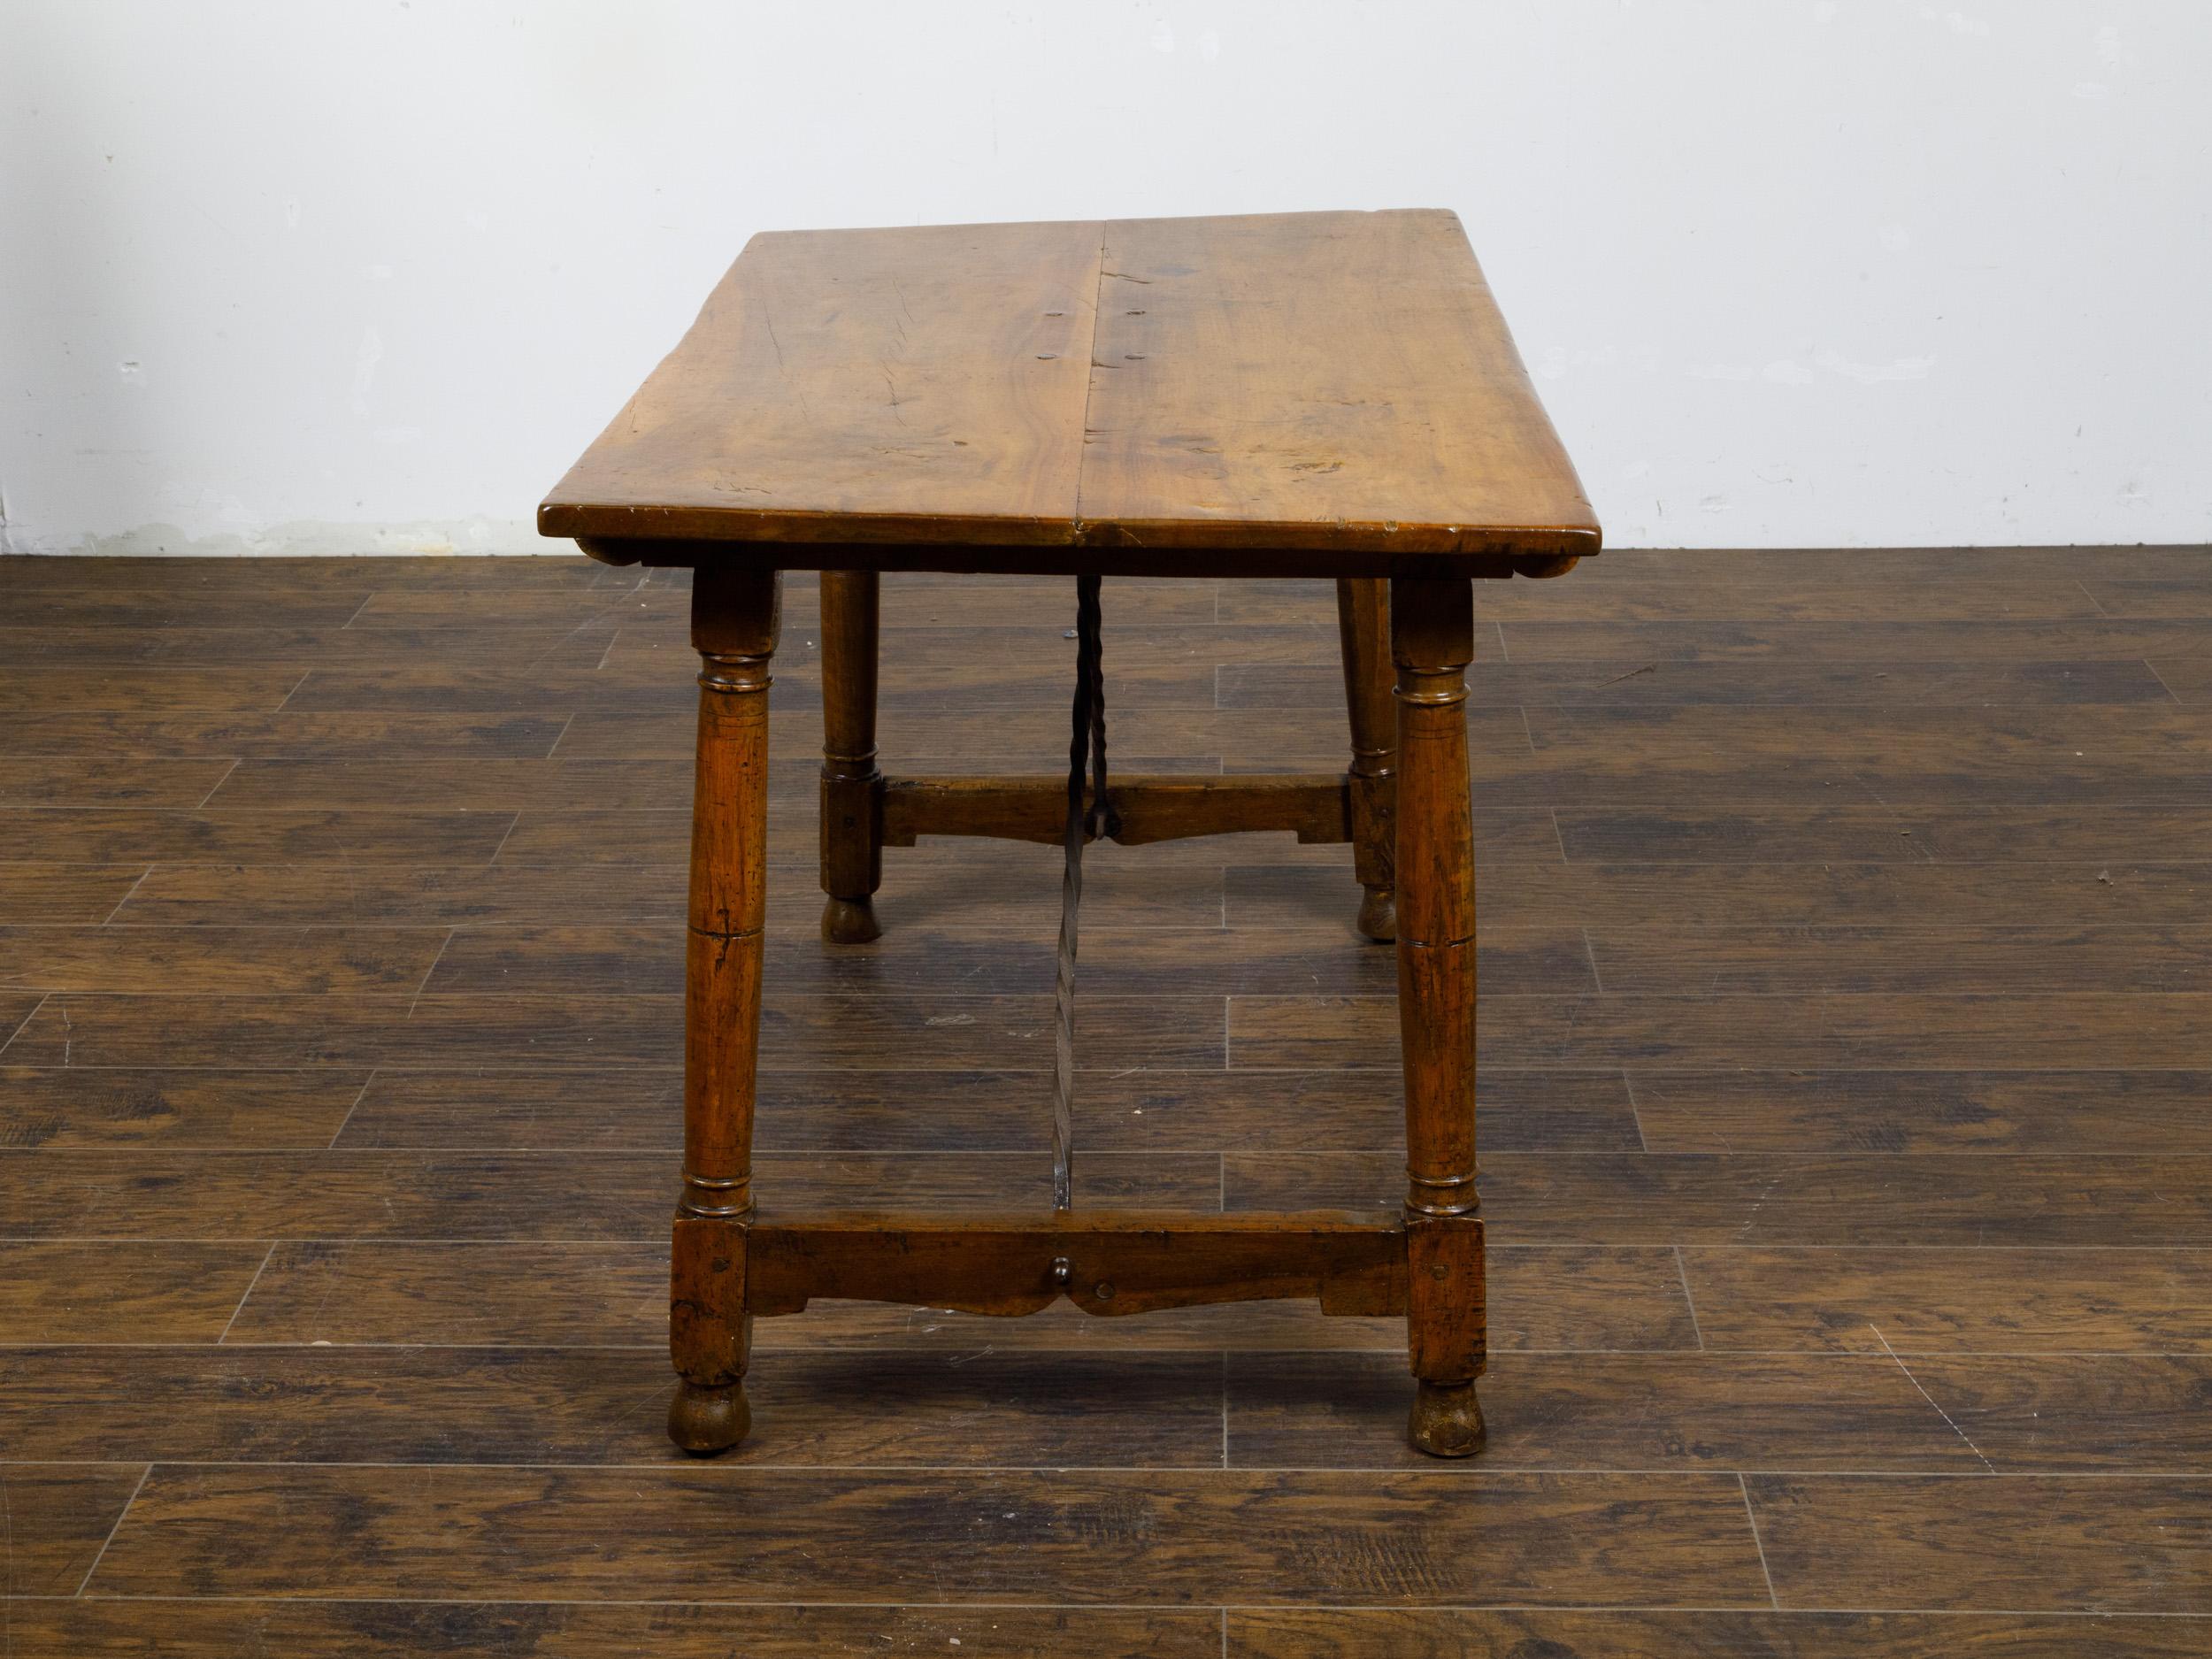 Italian 19th Century Walnut Console Table with Column Legs and Iron Stretchers In Good Condition For Sale In Atlanta, GA